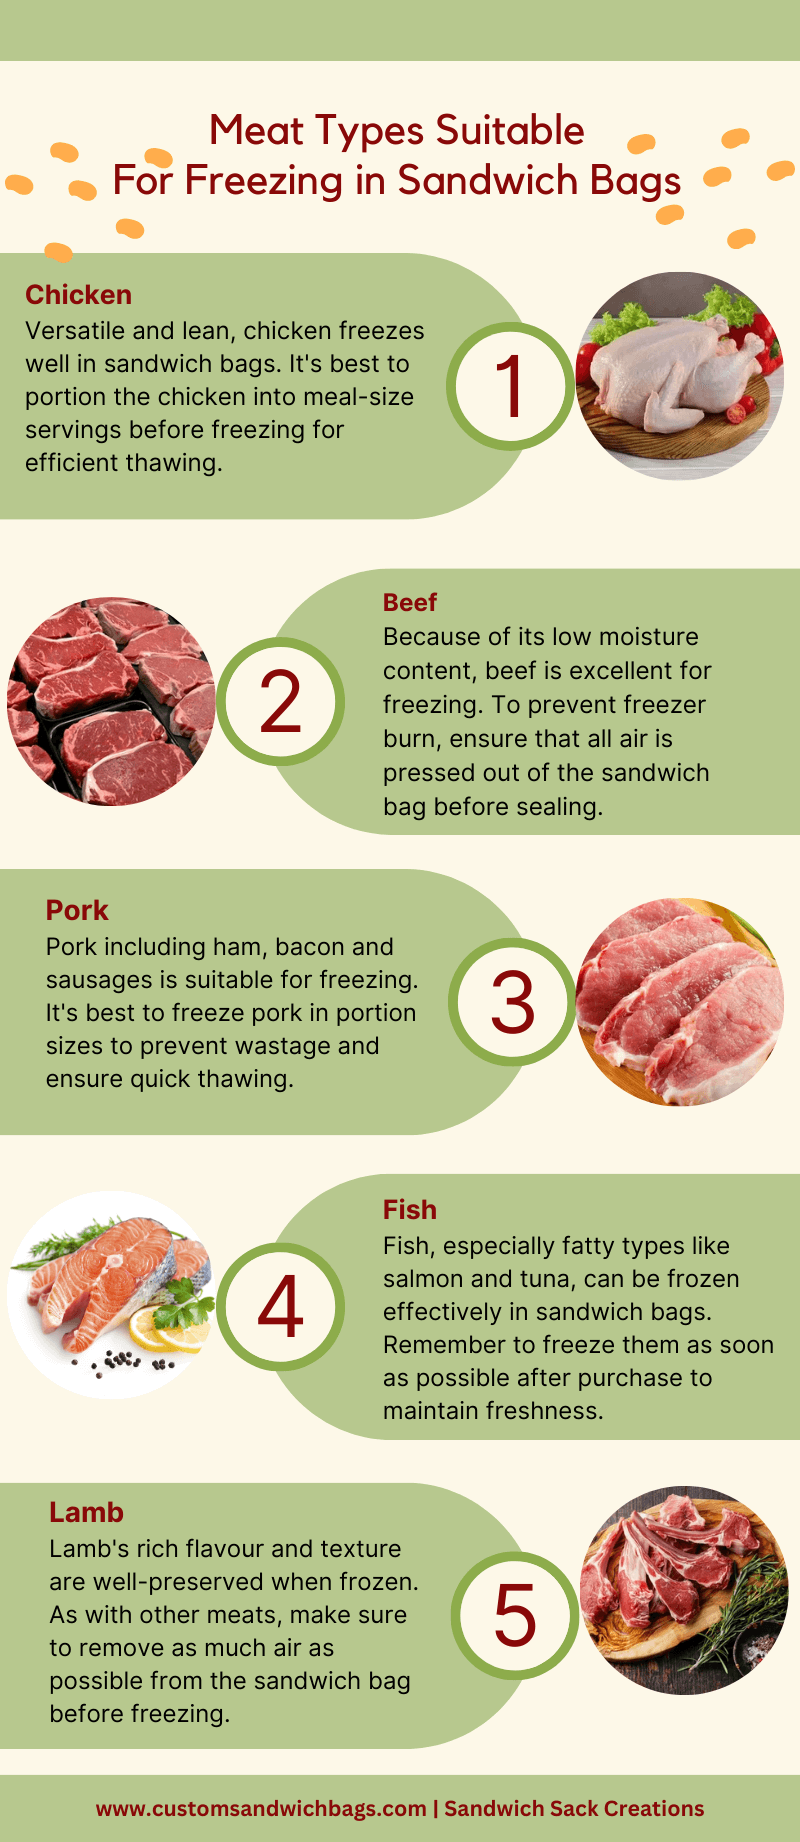 Meat Suitable for Freezing in Sandwich Bags